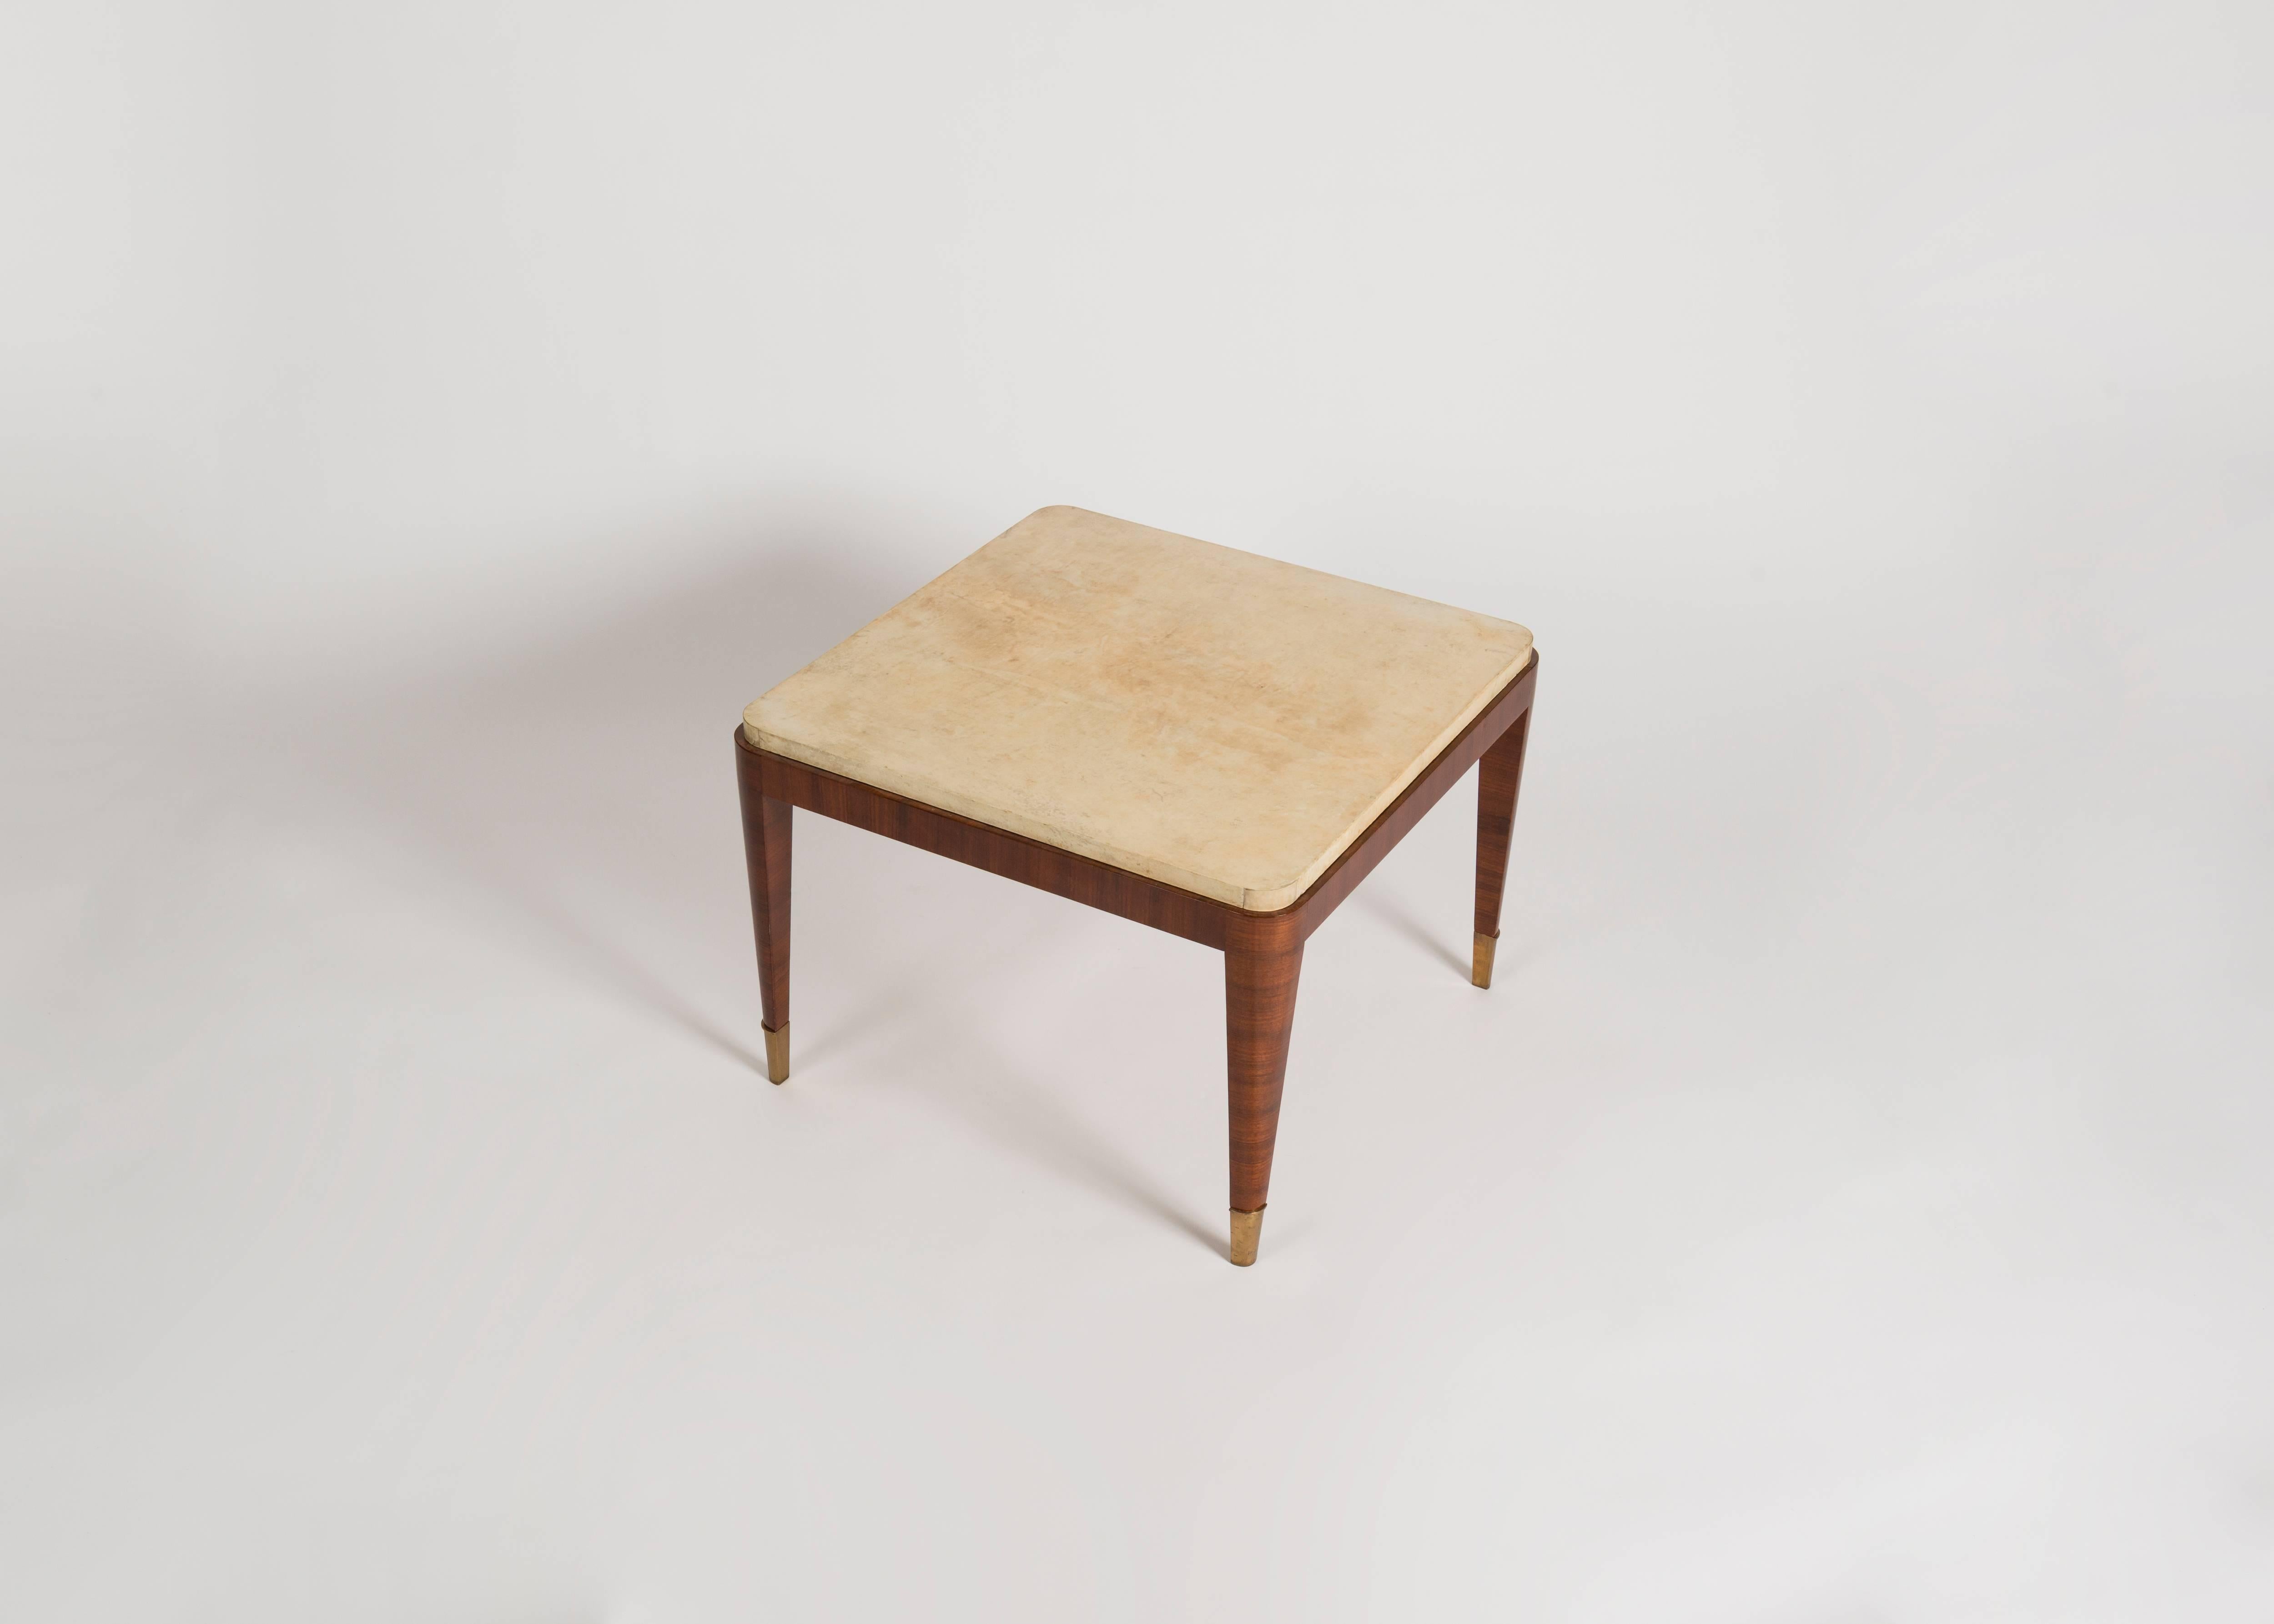 This deco coffee table in striped mahogany, featuring gilt bronze sabots and a lush parchment top, is remarkable for its fine legs, geometric top, rounded corners, and altogether subtle and delicate proportions. The parchment top is a probable